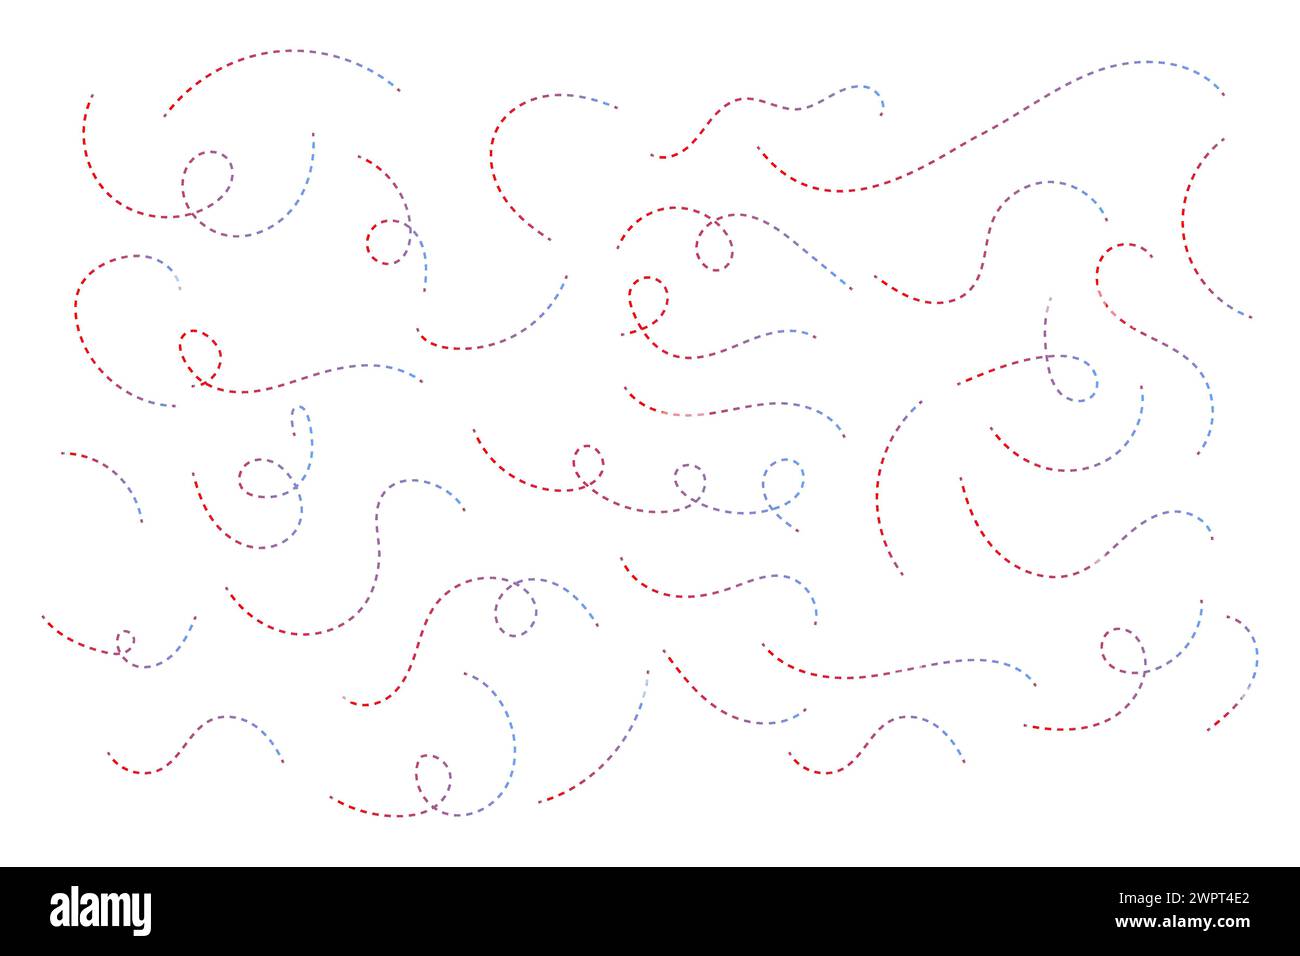 Hand drawn dotted curved line shape vector. Stock Vector